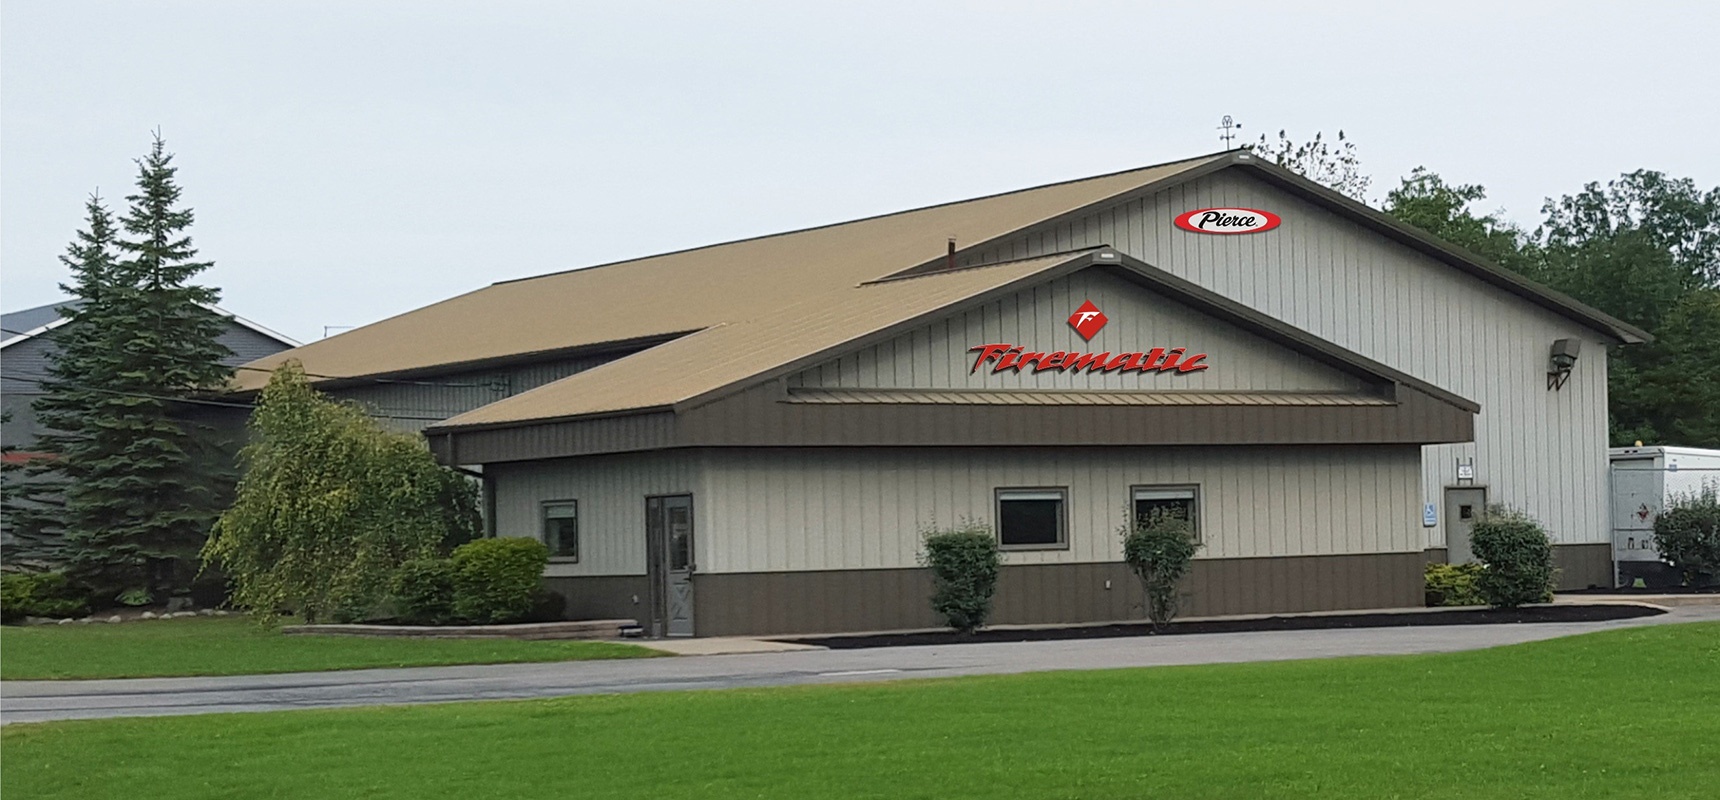 Pierce-Dealer,-Firematic-Supply-Company,-Opens-New-Service-Facility-In-Upstate-New-York_Header.jpg